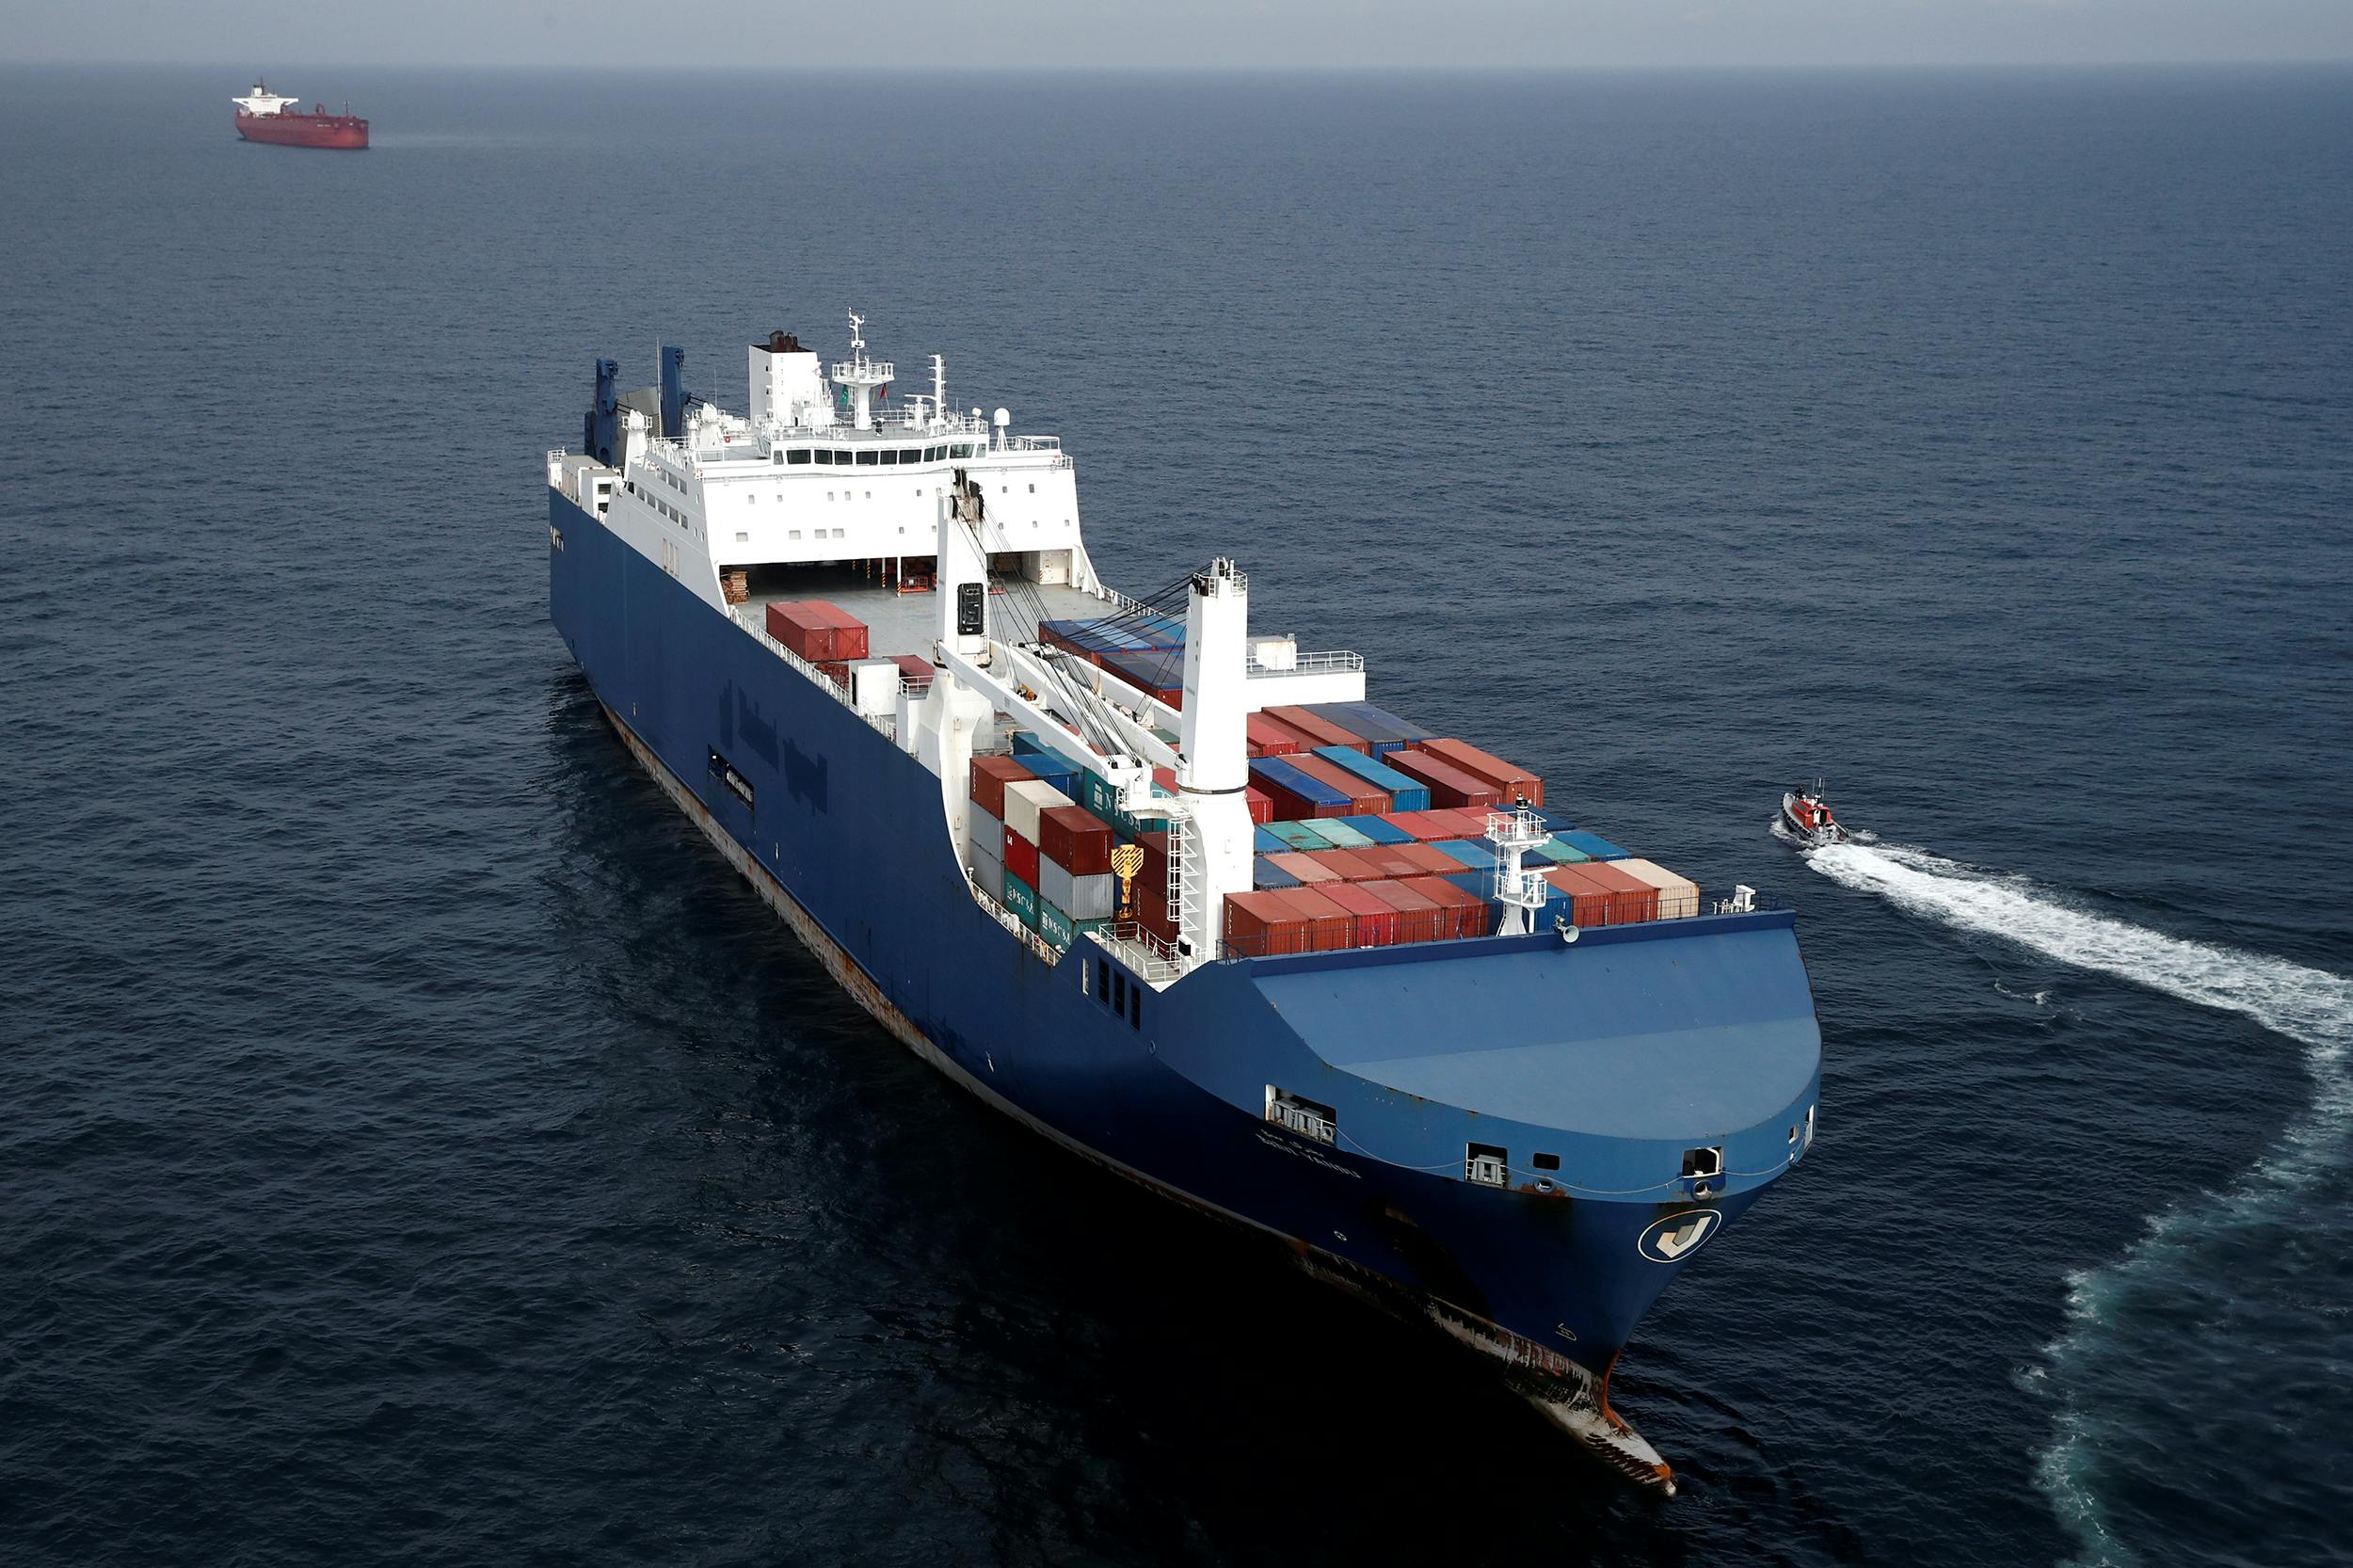 The Bahri-Yanbu, a Saudi Arabian cargo ship, waits to enter in the port of Le Havre, as human rights groups try to block the loading of weapons onto the vessel, France, May 10, 2019. 